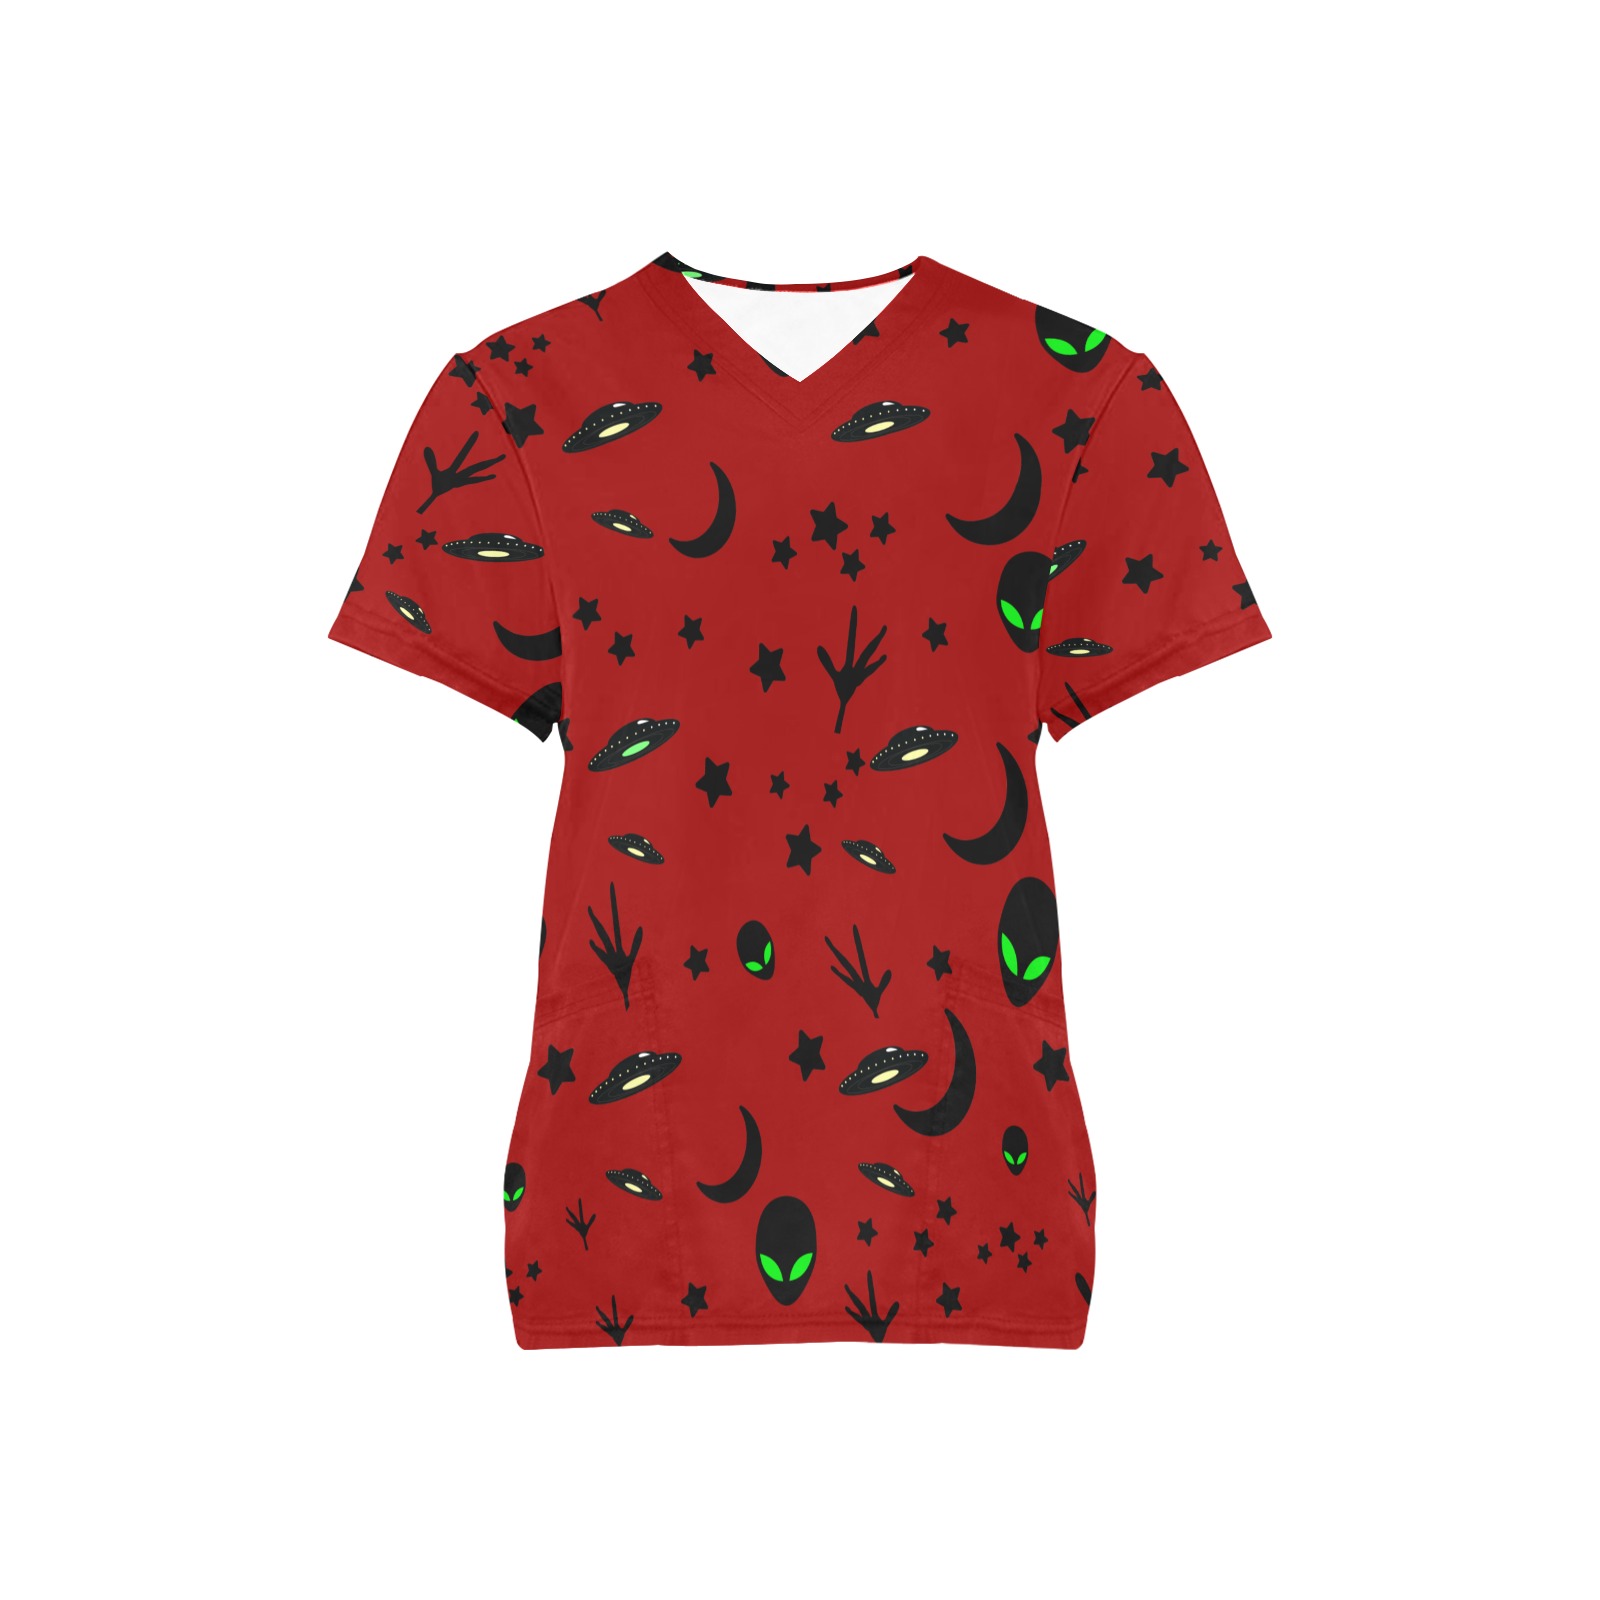 Aliens and Spaceships - Red All Over Print Scrub Top